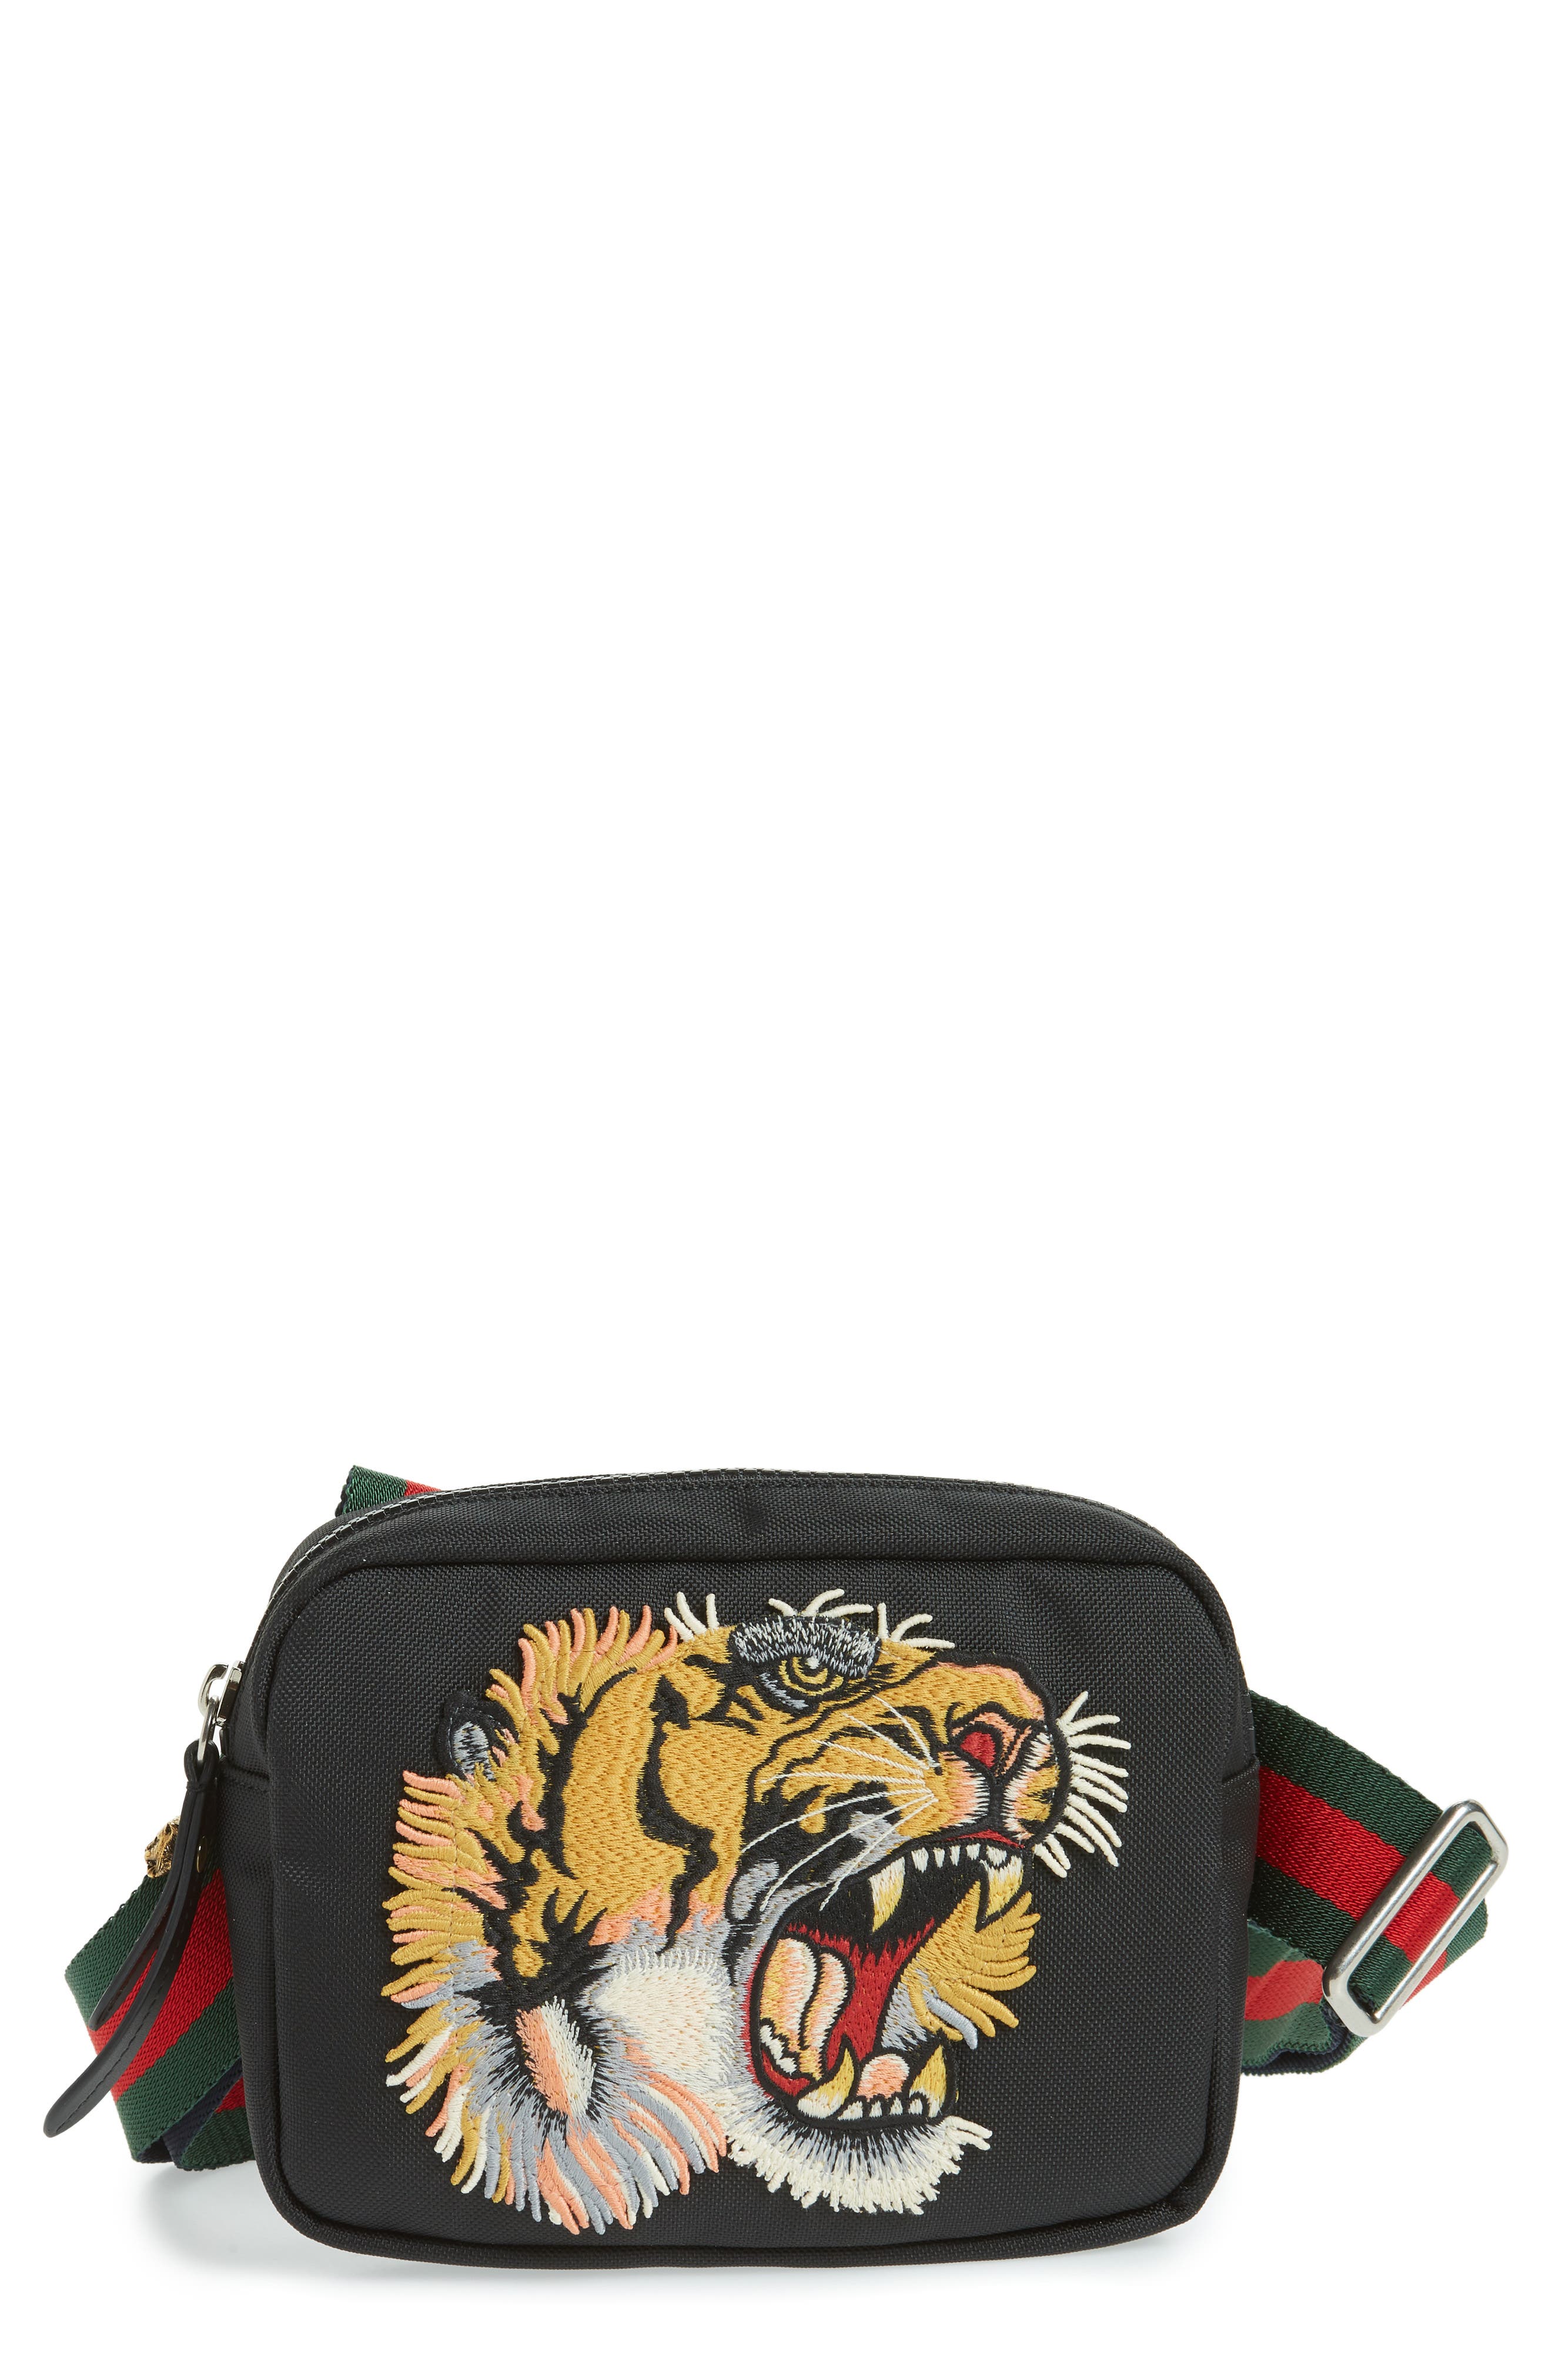 Gucci Tiger Embroidered Travel Bag 